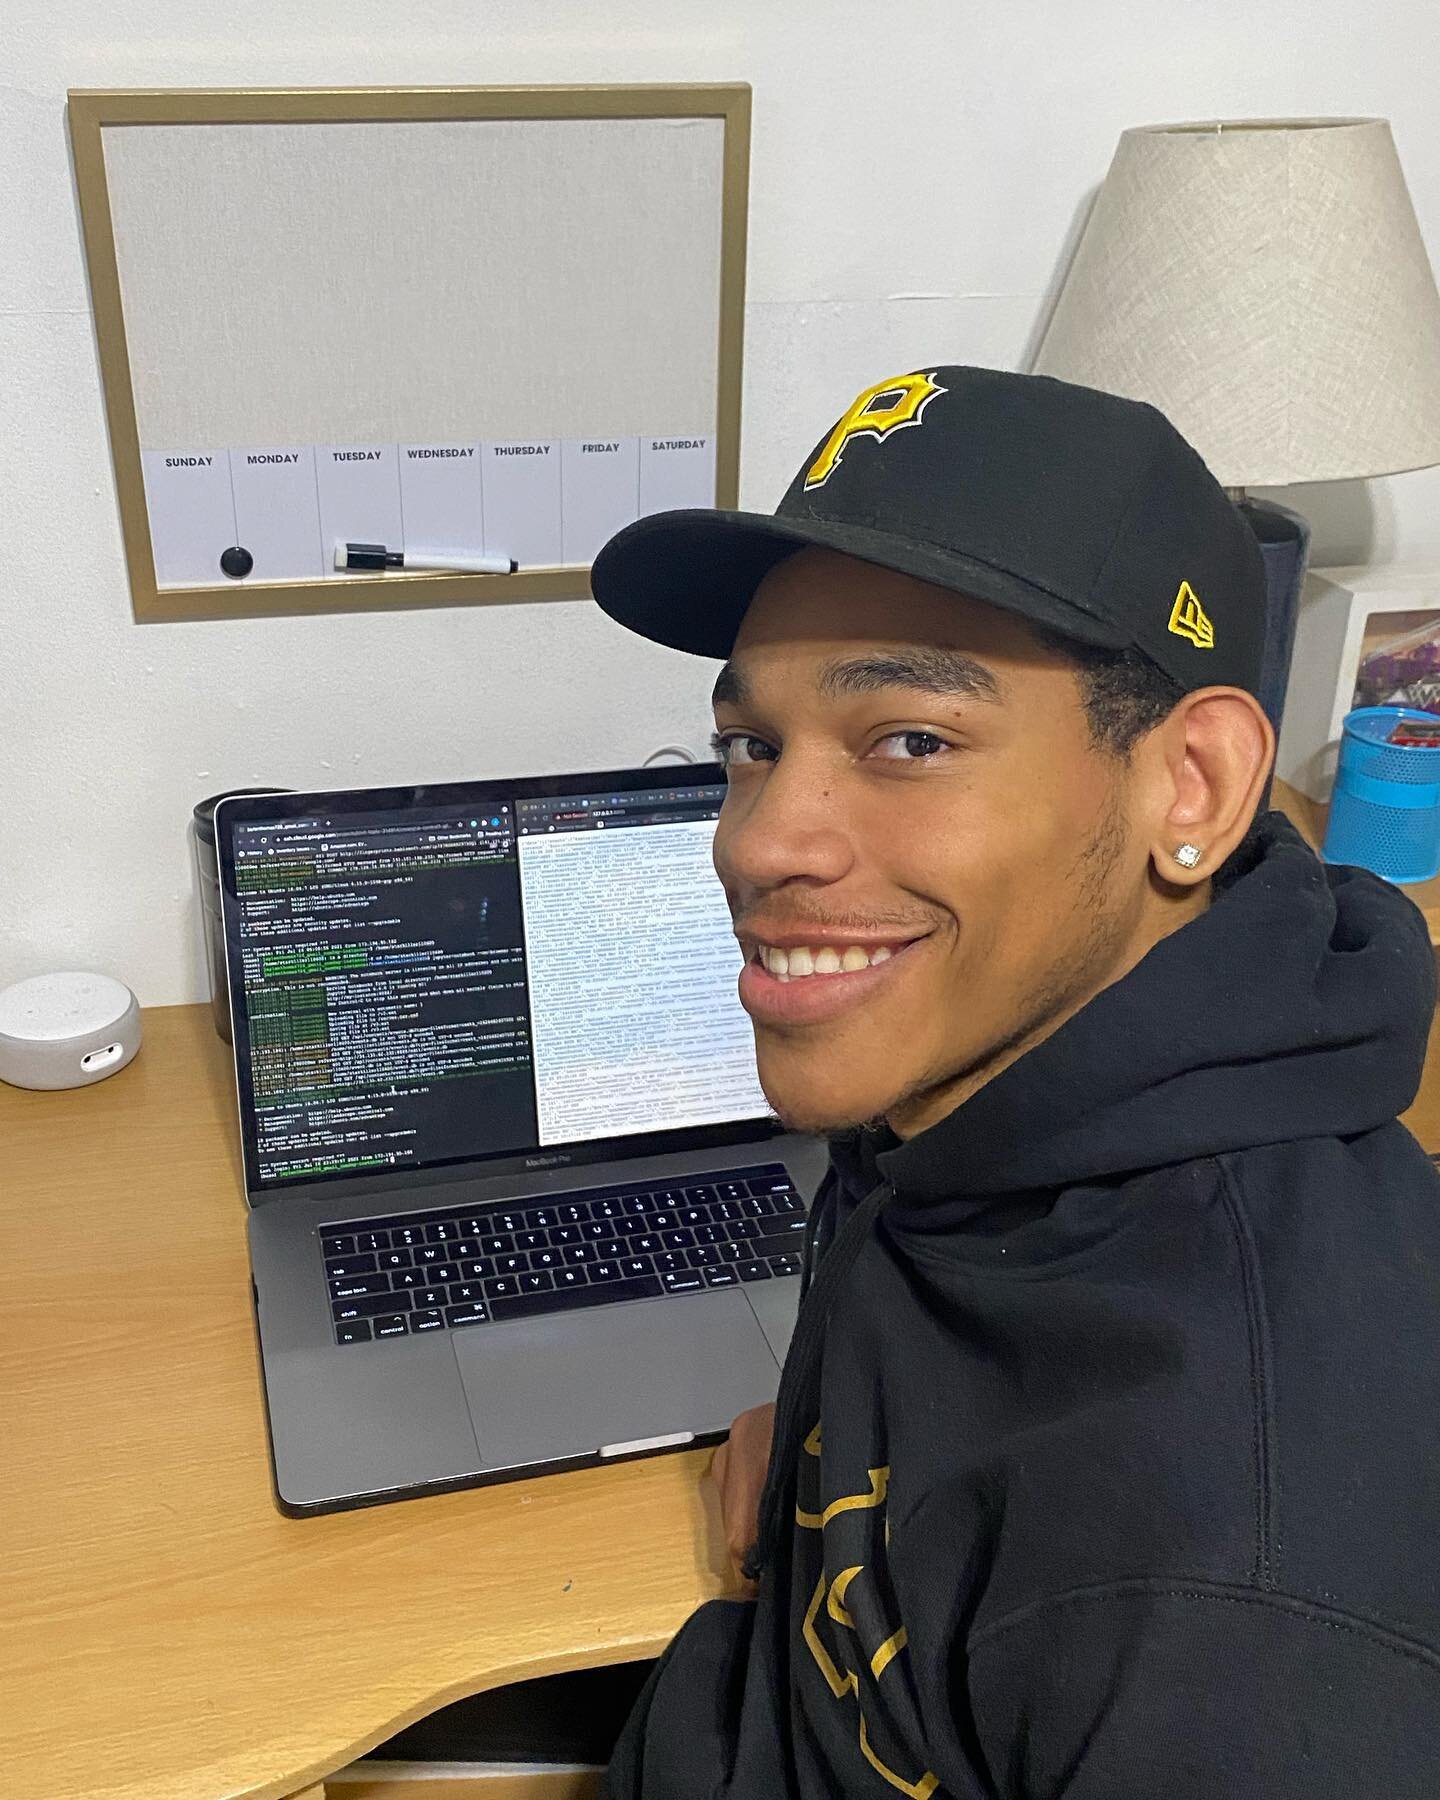 This summer, Bro. Jaylen Thomas is working as a Research Assistant for the College of Engineering under Dr. Yaw Adu-Gyamfi. He is currently helping to create an application that will monitor traffic information, such as road work and accidents, in th